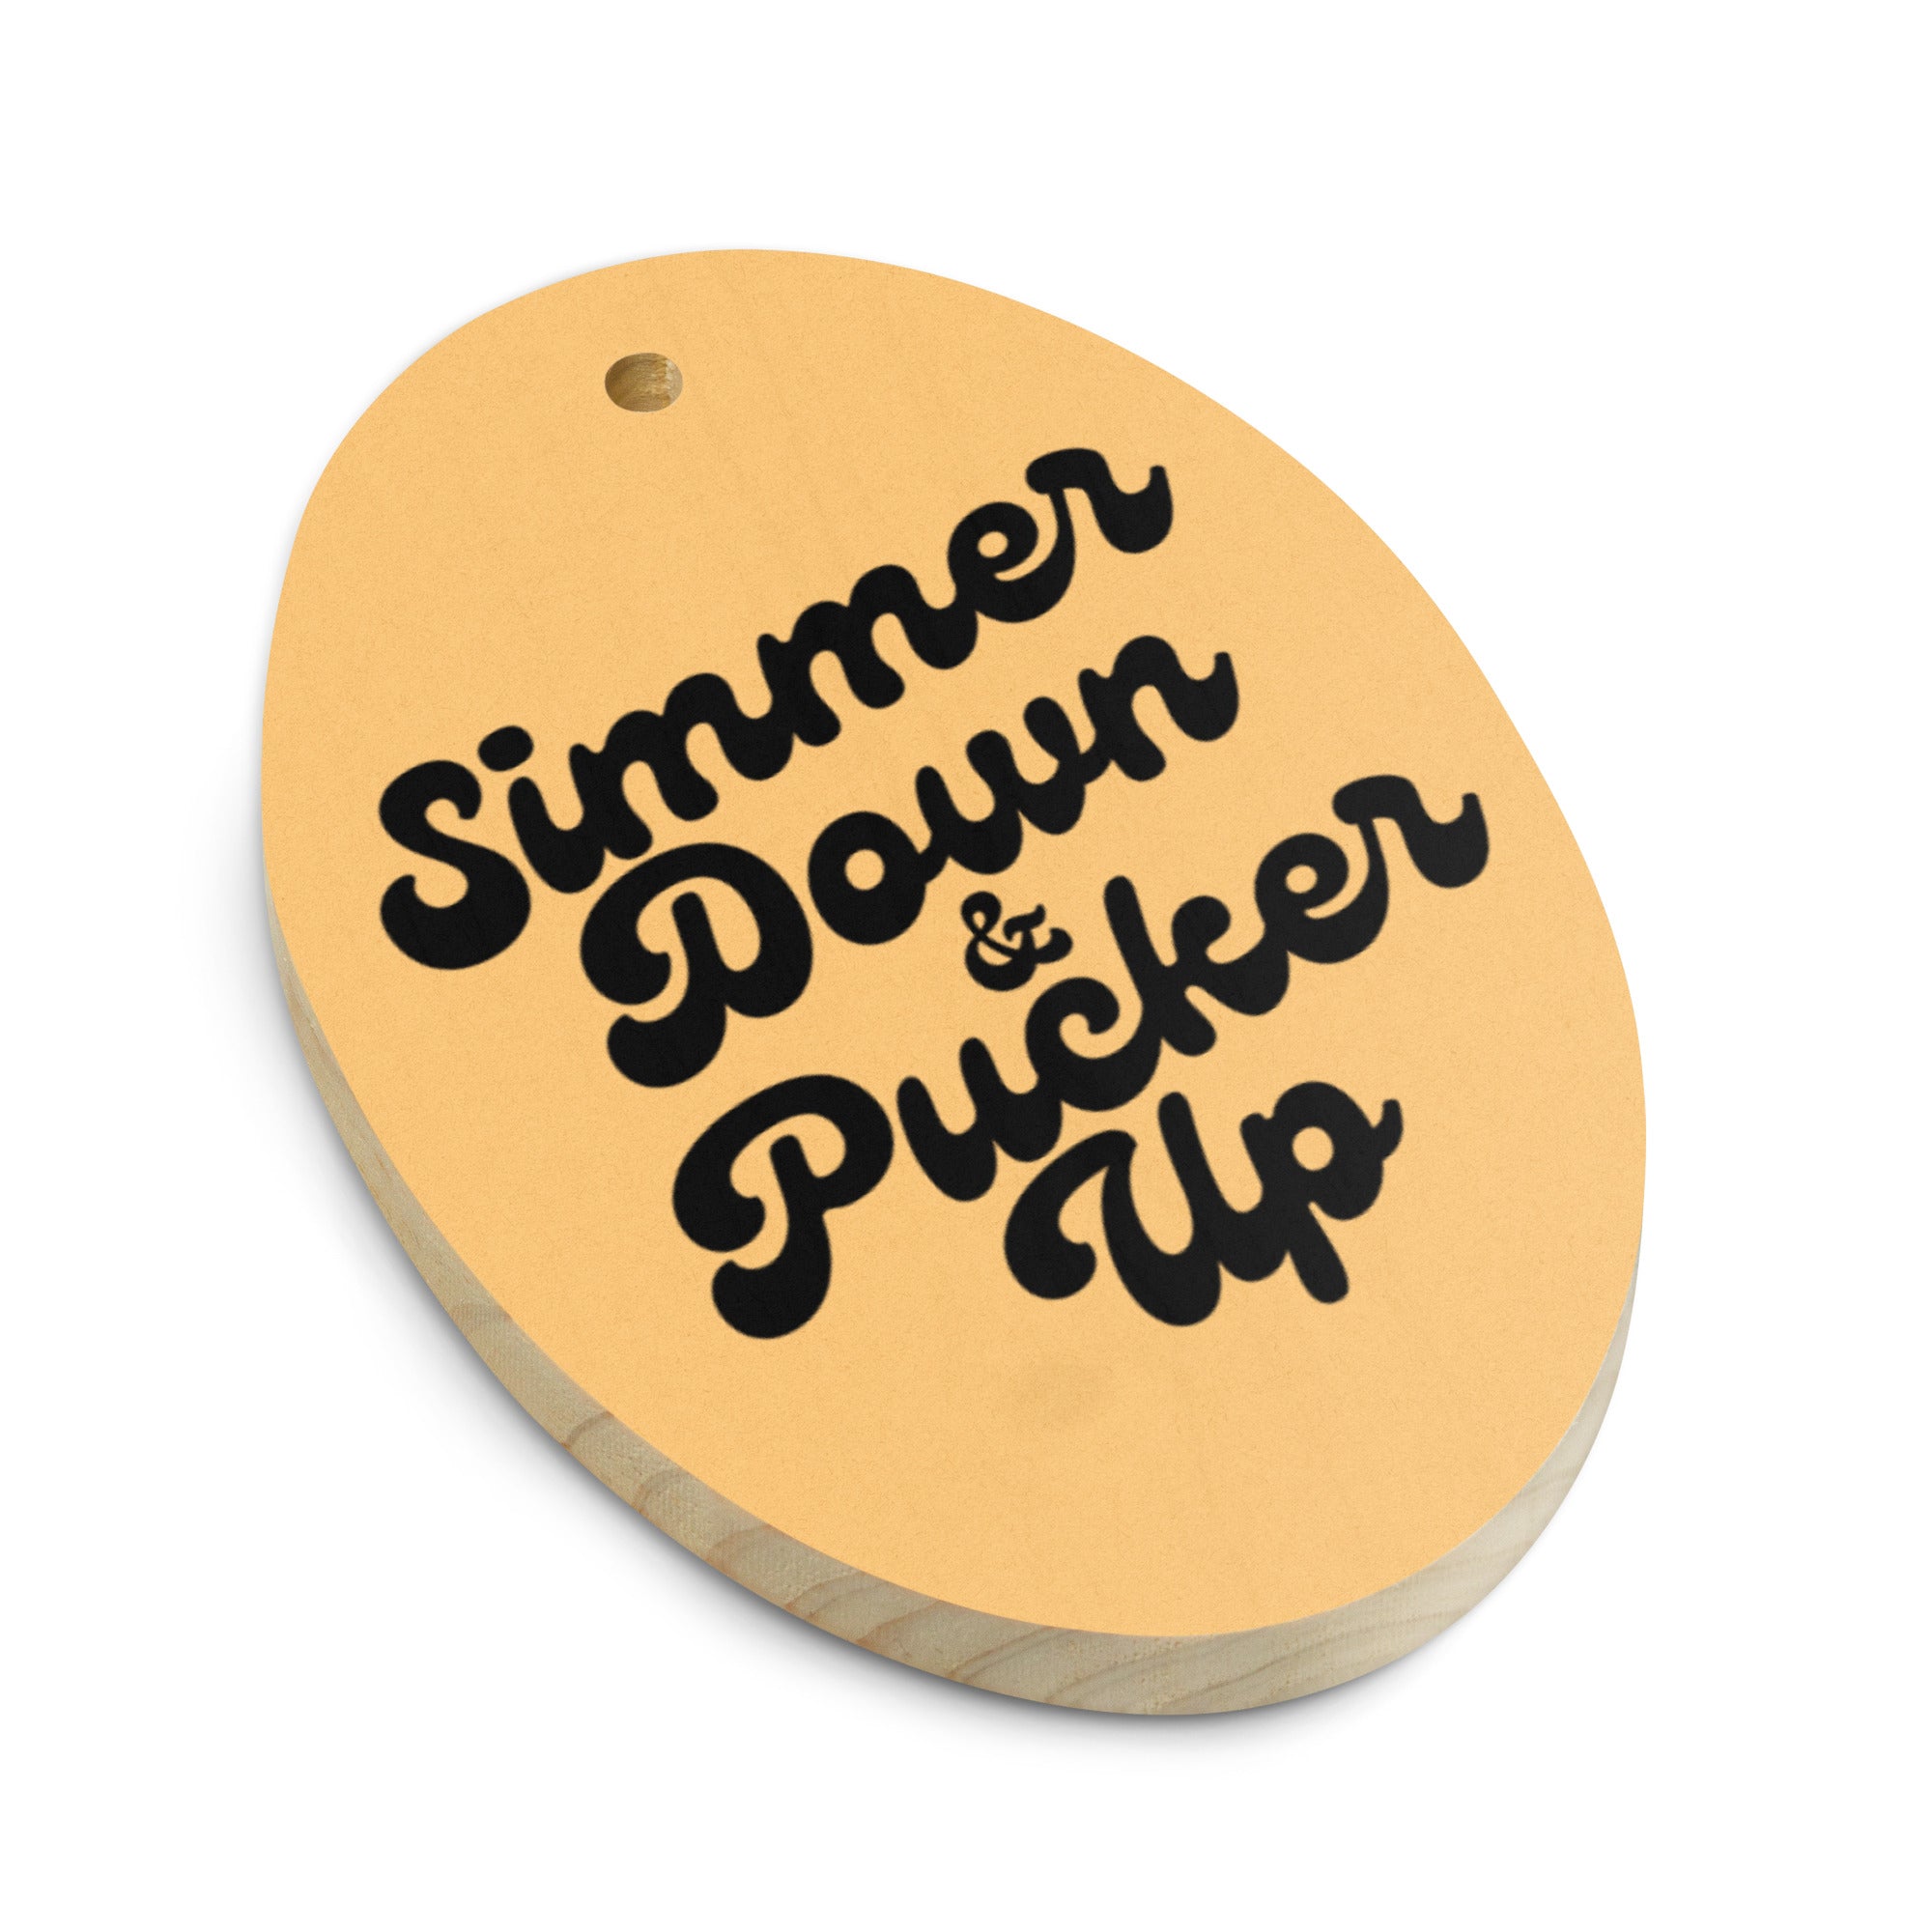 Simmer Down & Pucker Up 70's Typography Premium Printed Vintage Style Wooden Christmas Tree Holiday ornament - Vintage Gold / Black with Leopard back